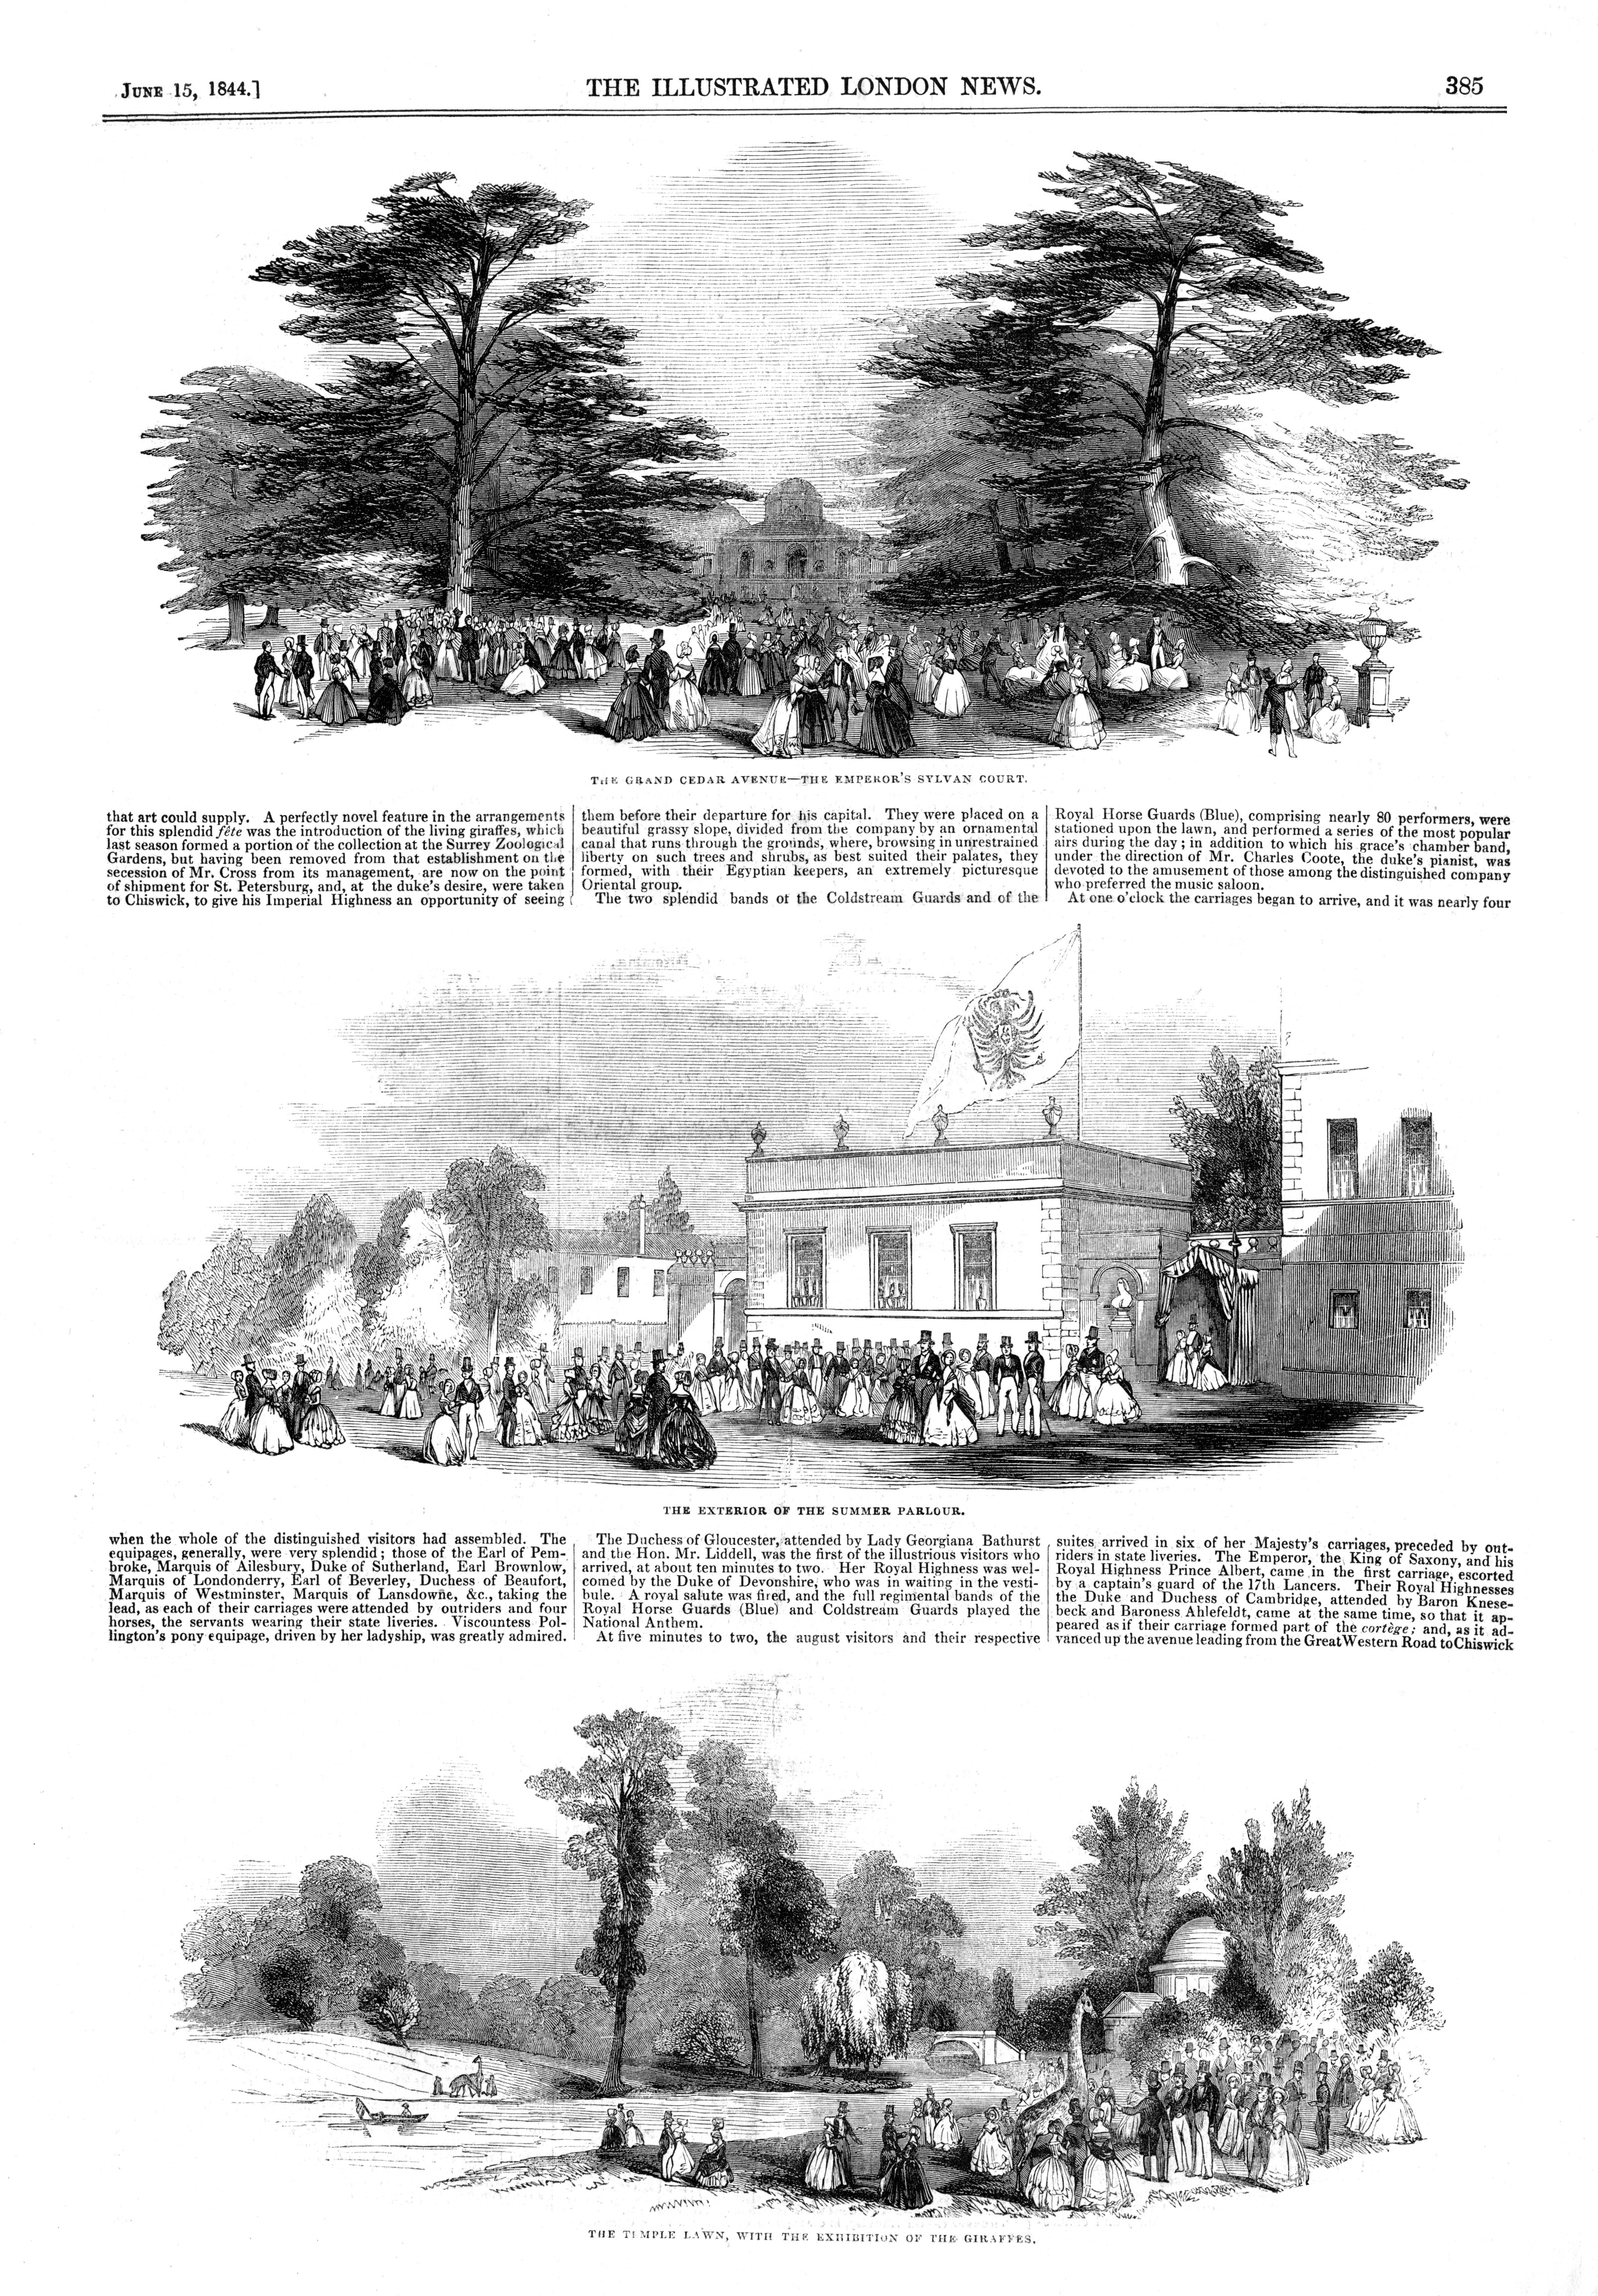 Chiswick House,park-countryside,prints Illustrated London News,giraffes